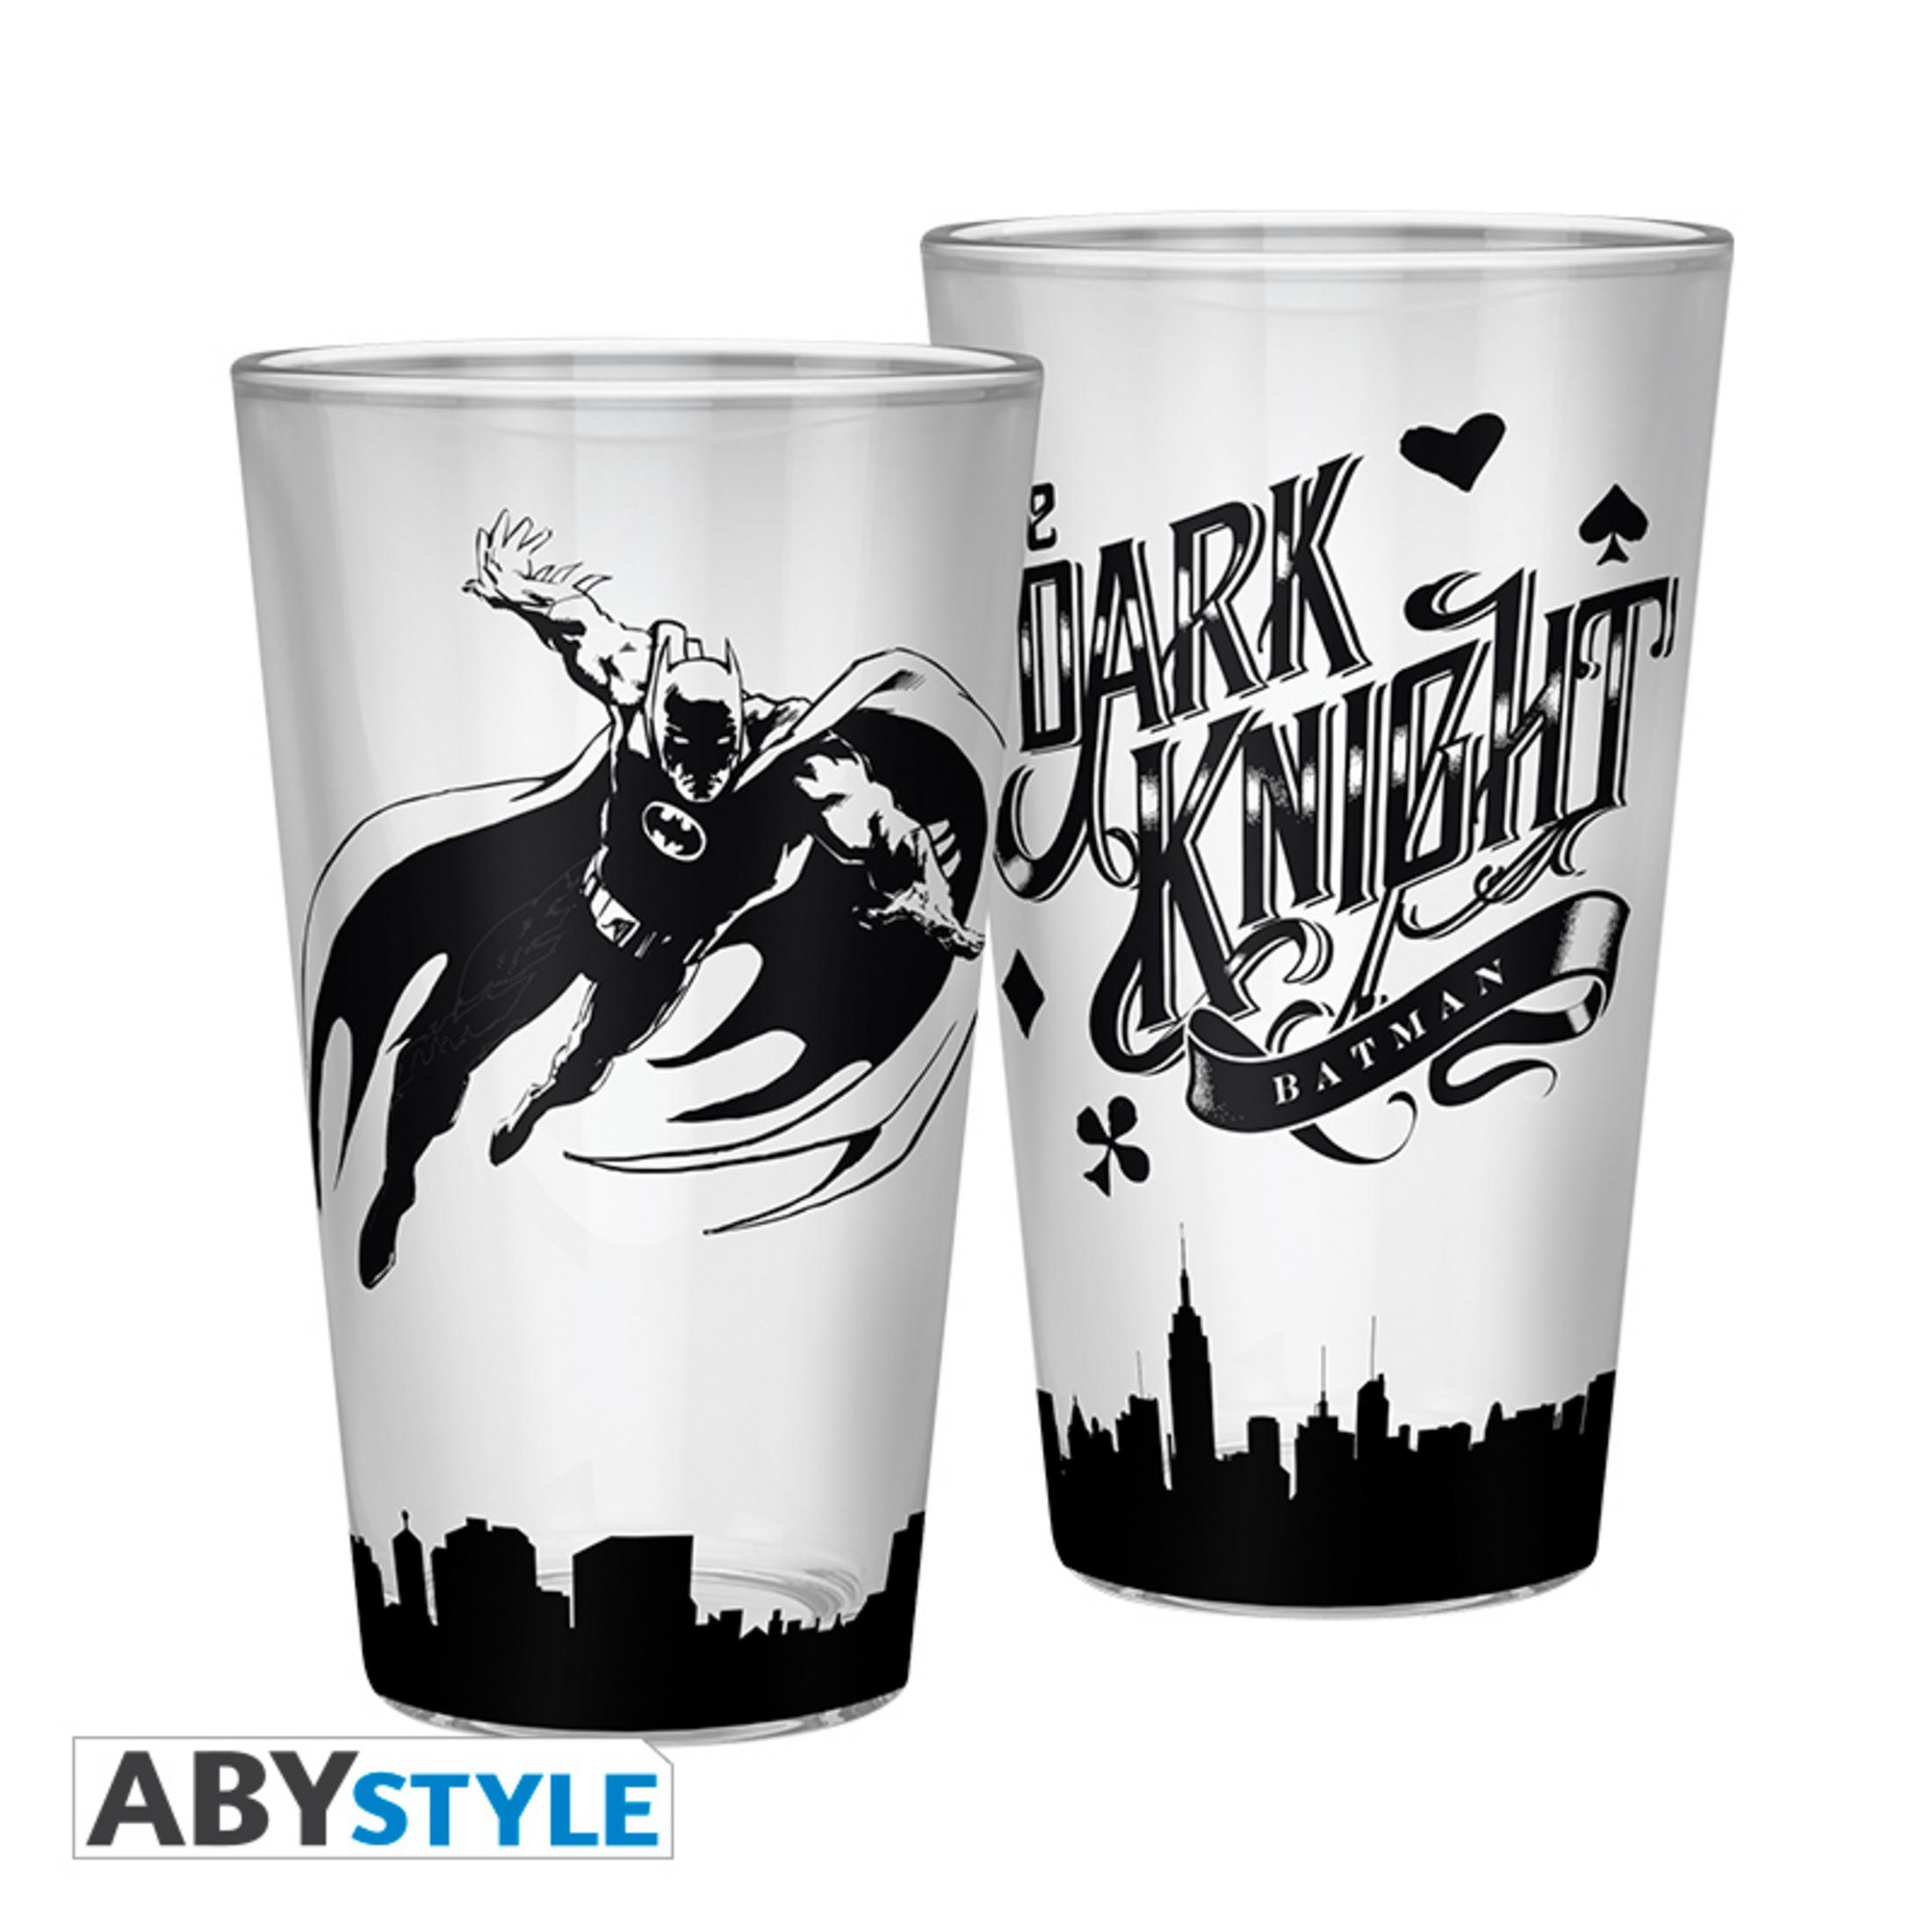 ABYVER126 DC BATMAN NGHT GLAS DRK 500ML